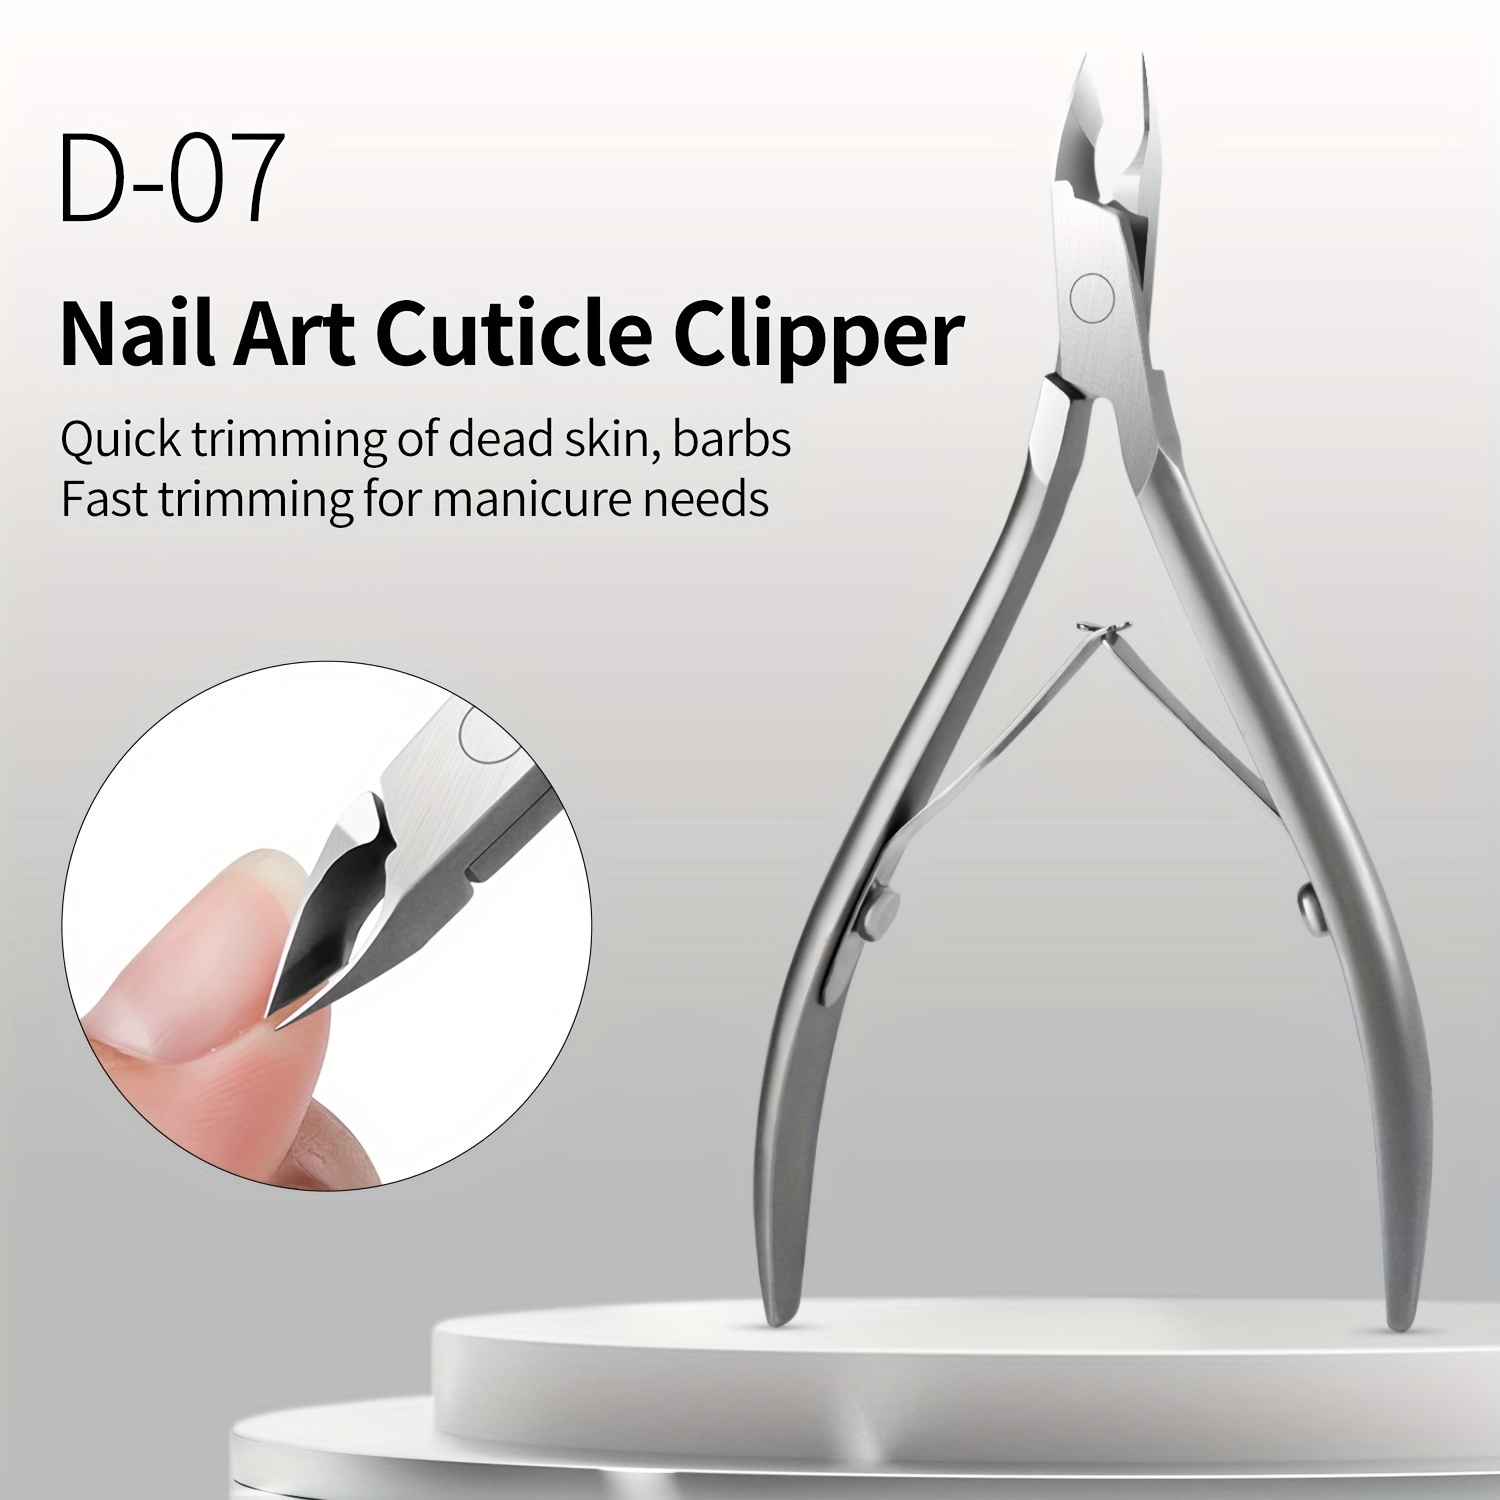 

Nail Cuticle Clippers, Precision Manicure Pedicure Tool, Stainless Steel, Sharp Dead Skin Trimmer With Dual Spring Design For Salon Quality Home Grooming